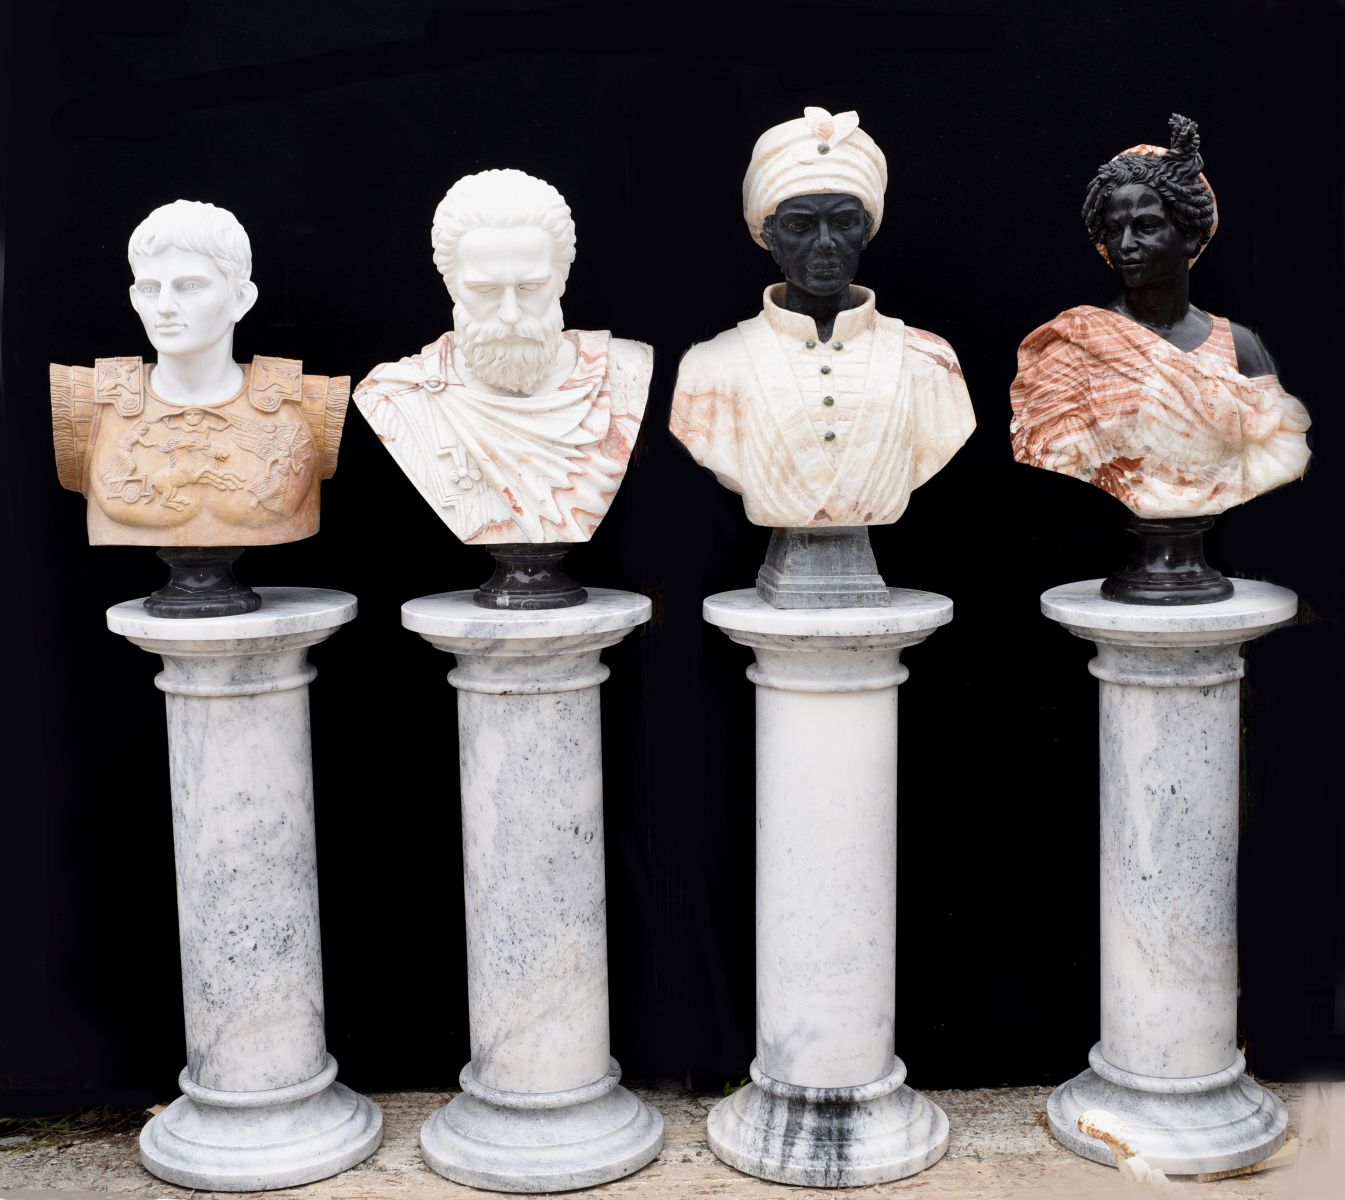 Greek and Roman, philosophers, poets and Emperors - Classical busts